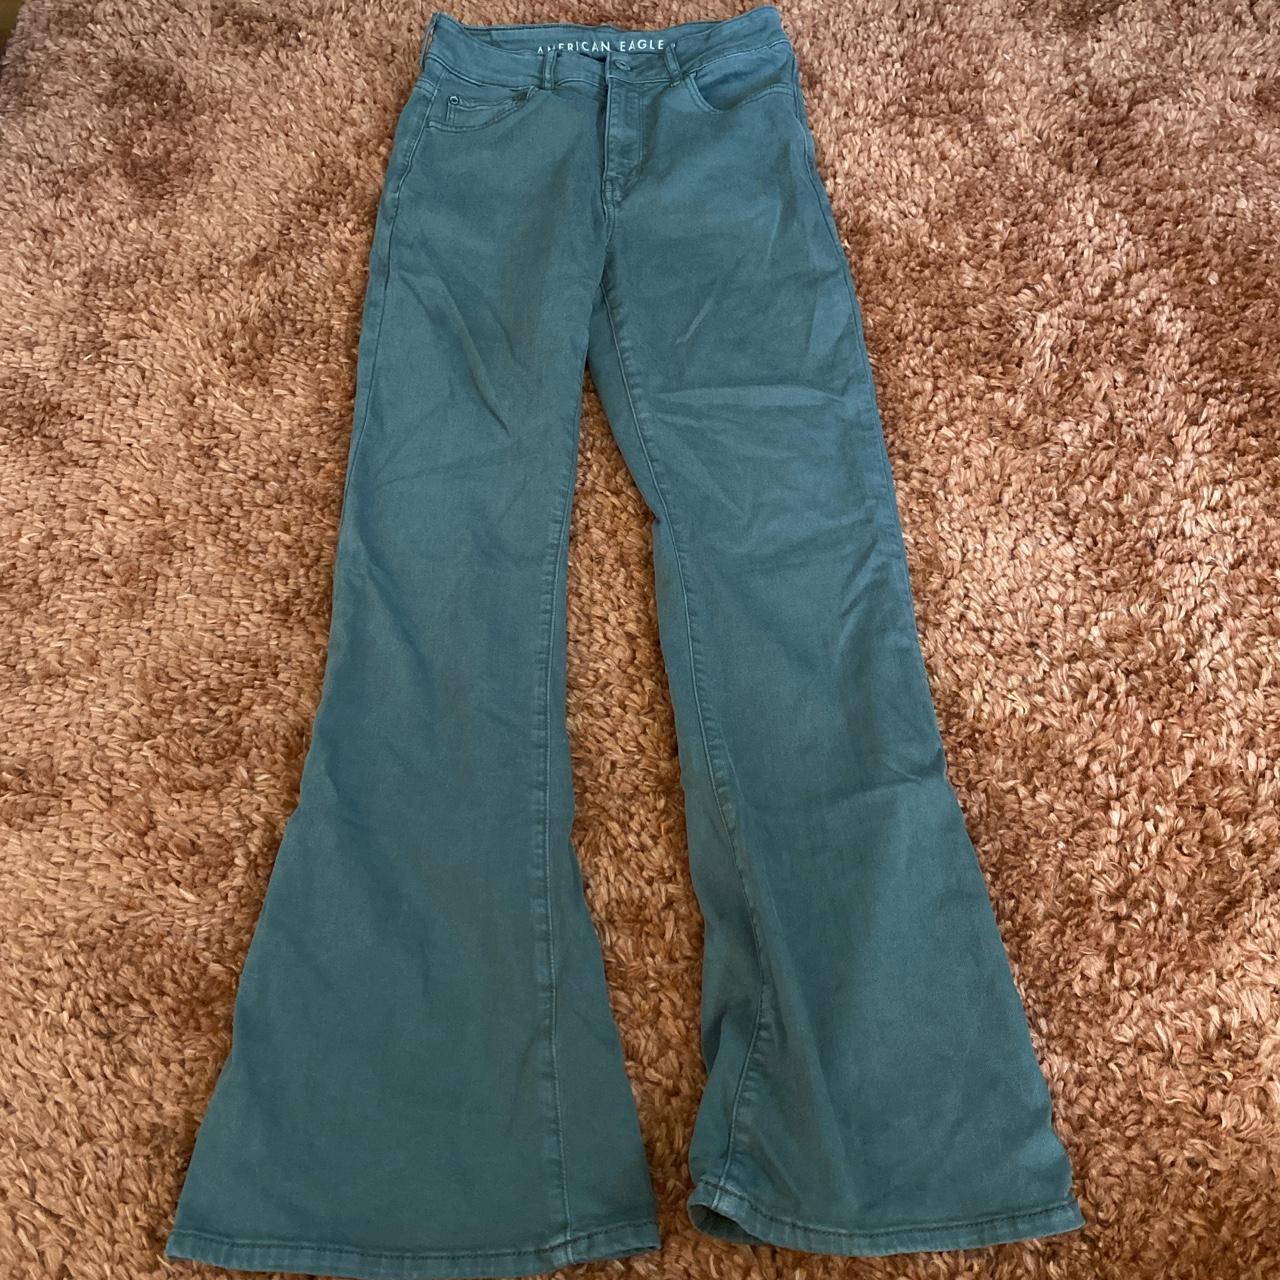 american eagle flare jeans - very stretchy - were - Depop